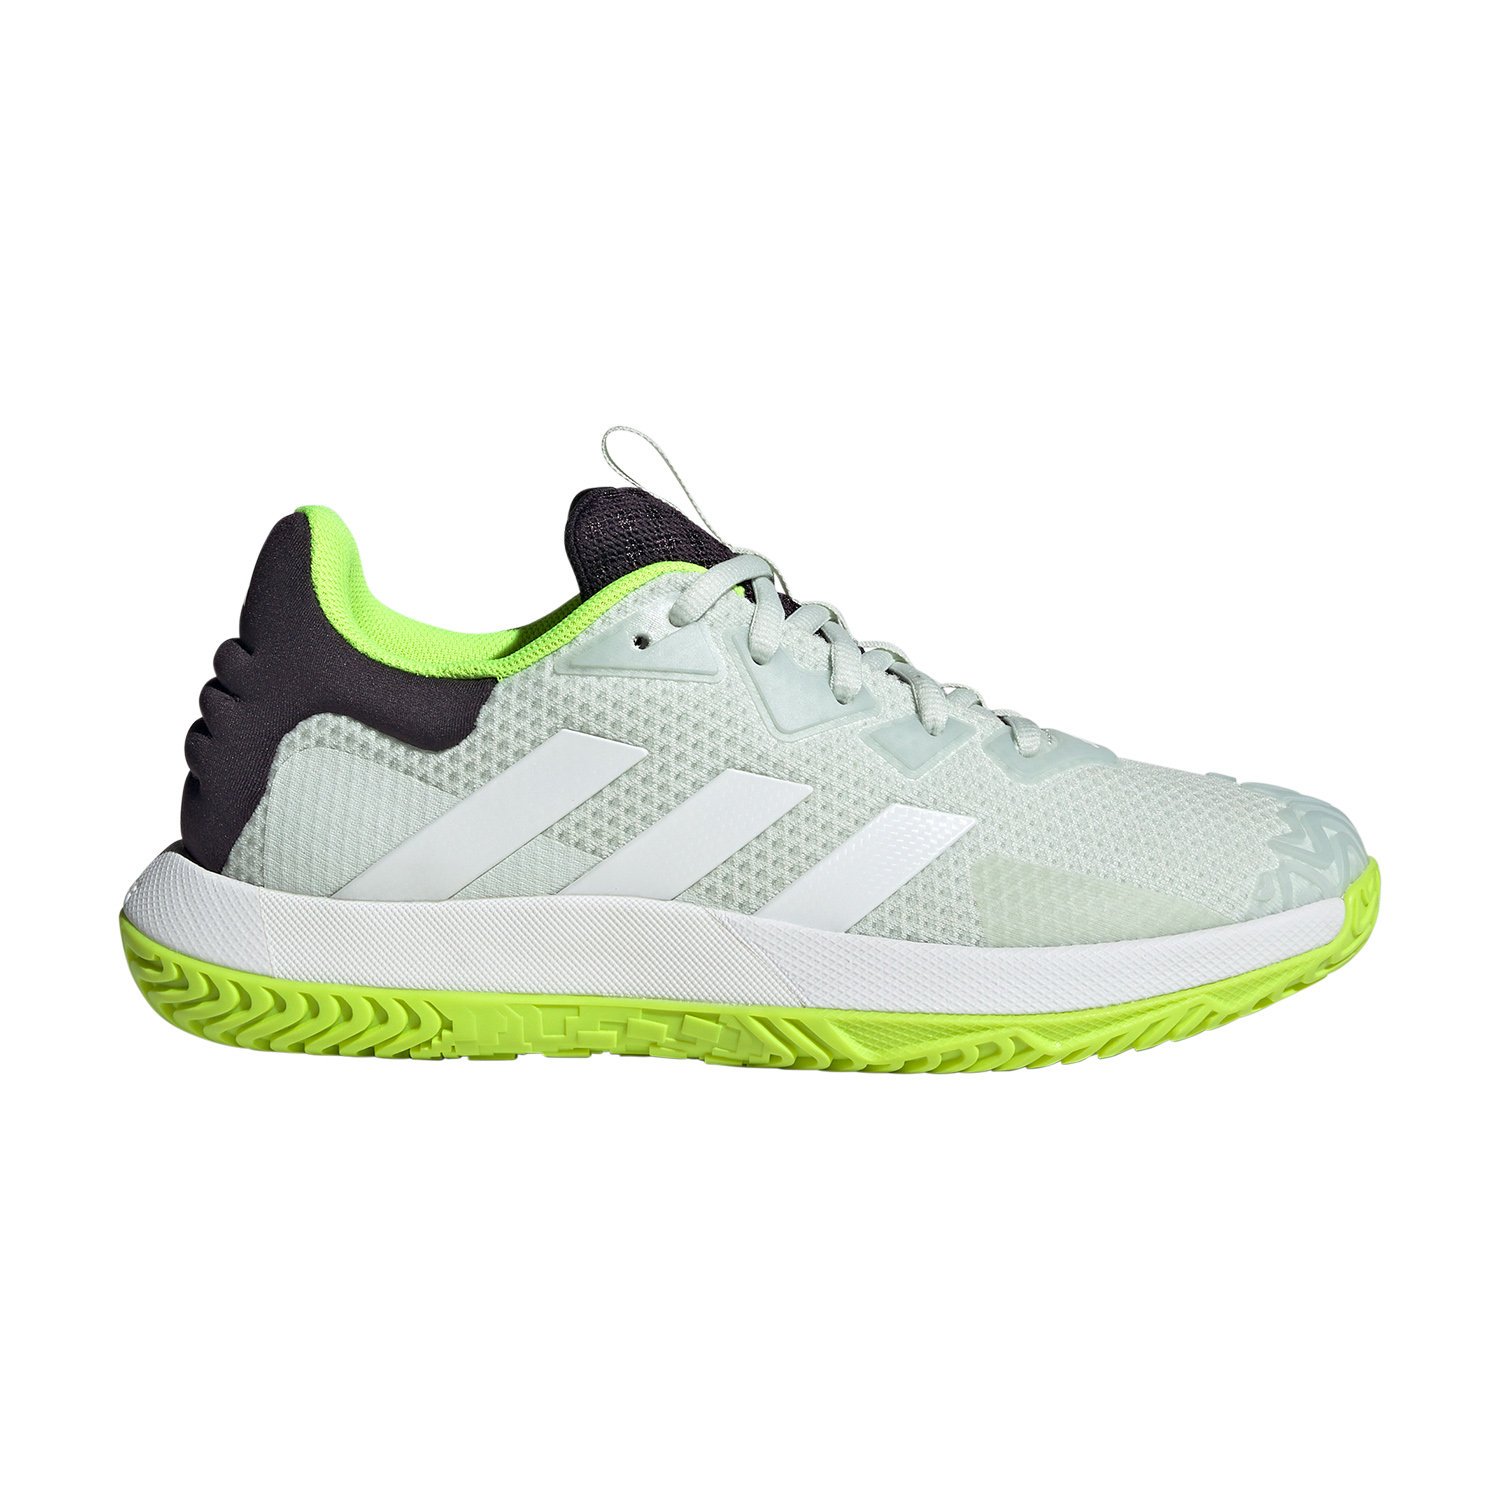 adidas SoleMatch Control Men's Tennis Shoes - Crystal Jade